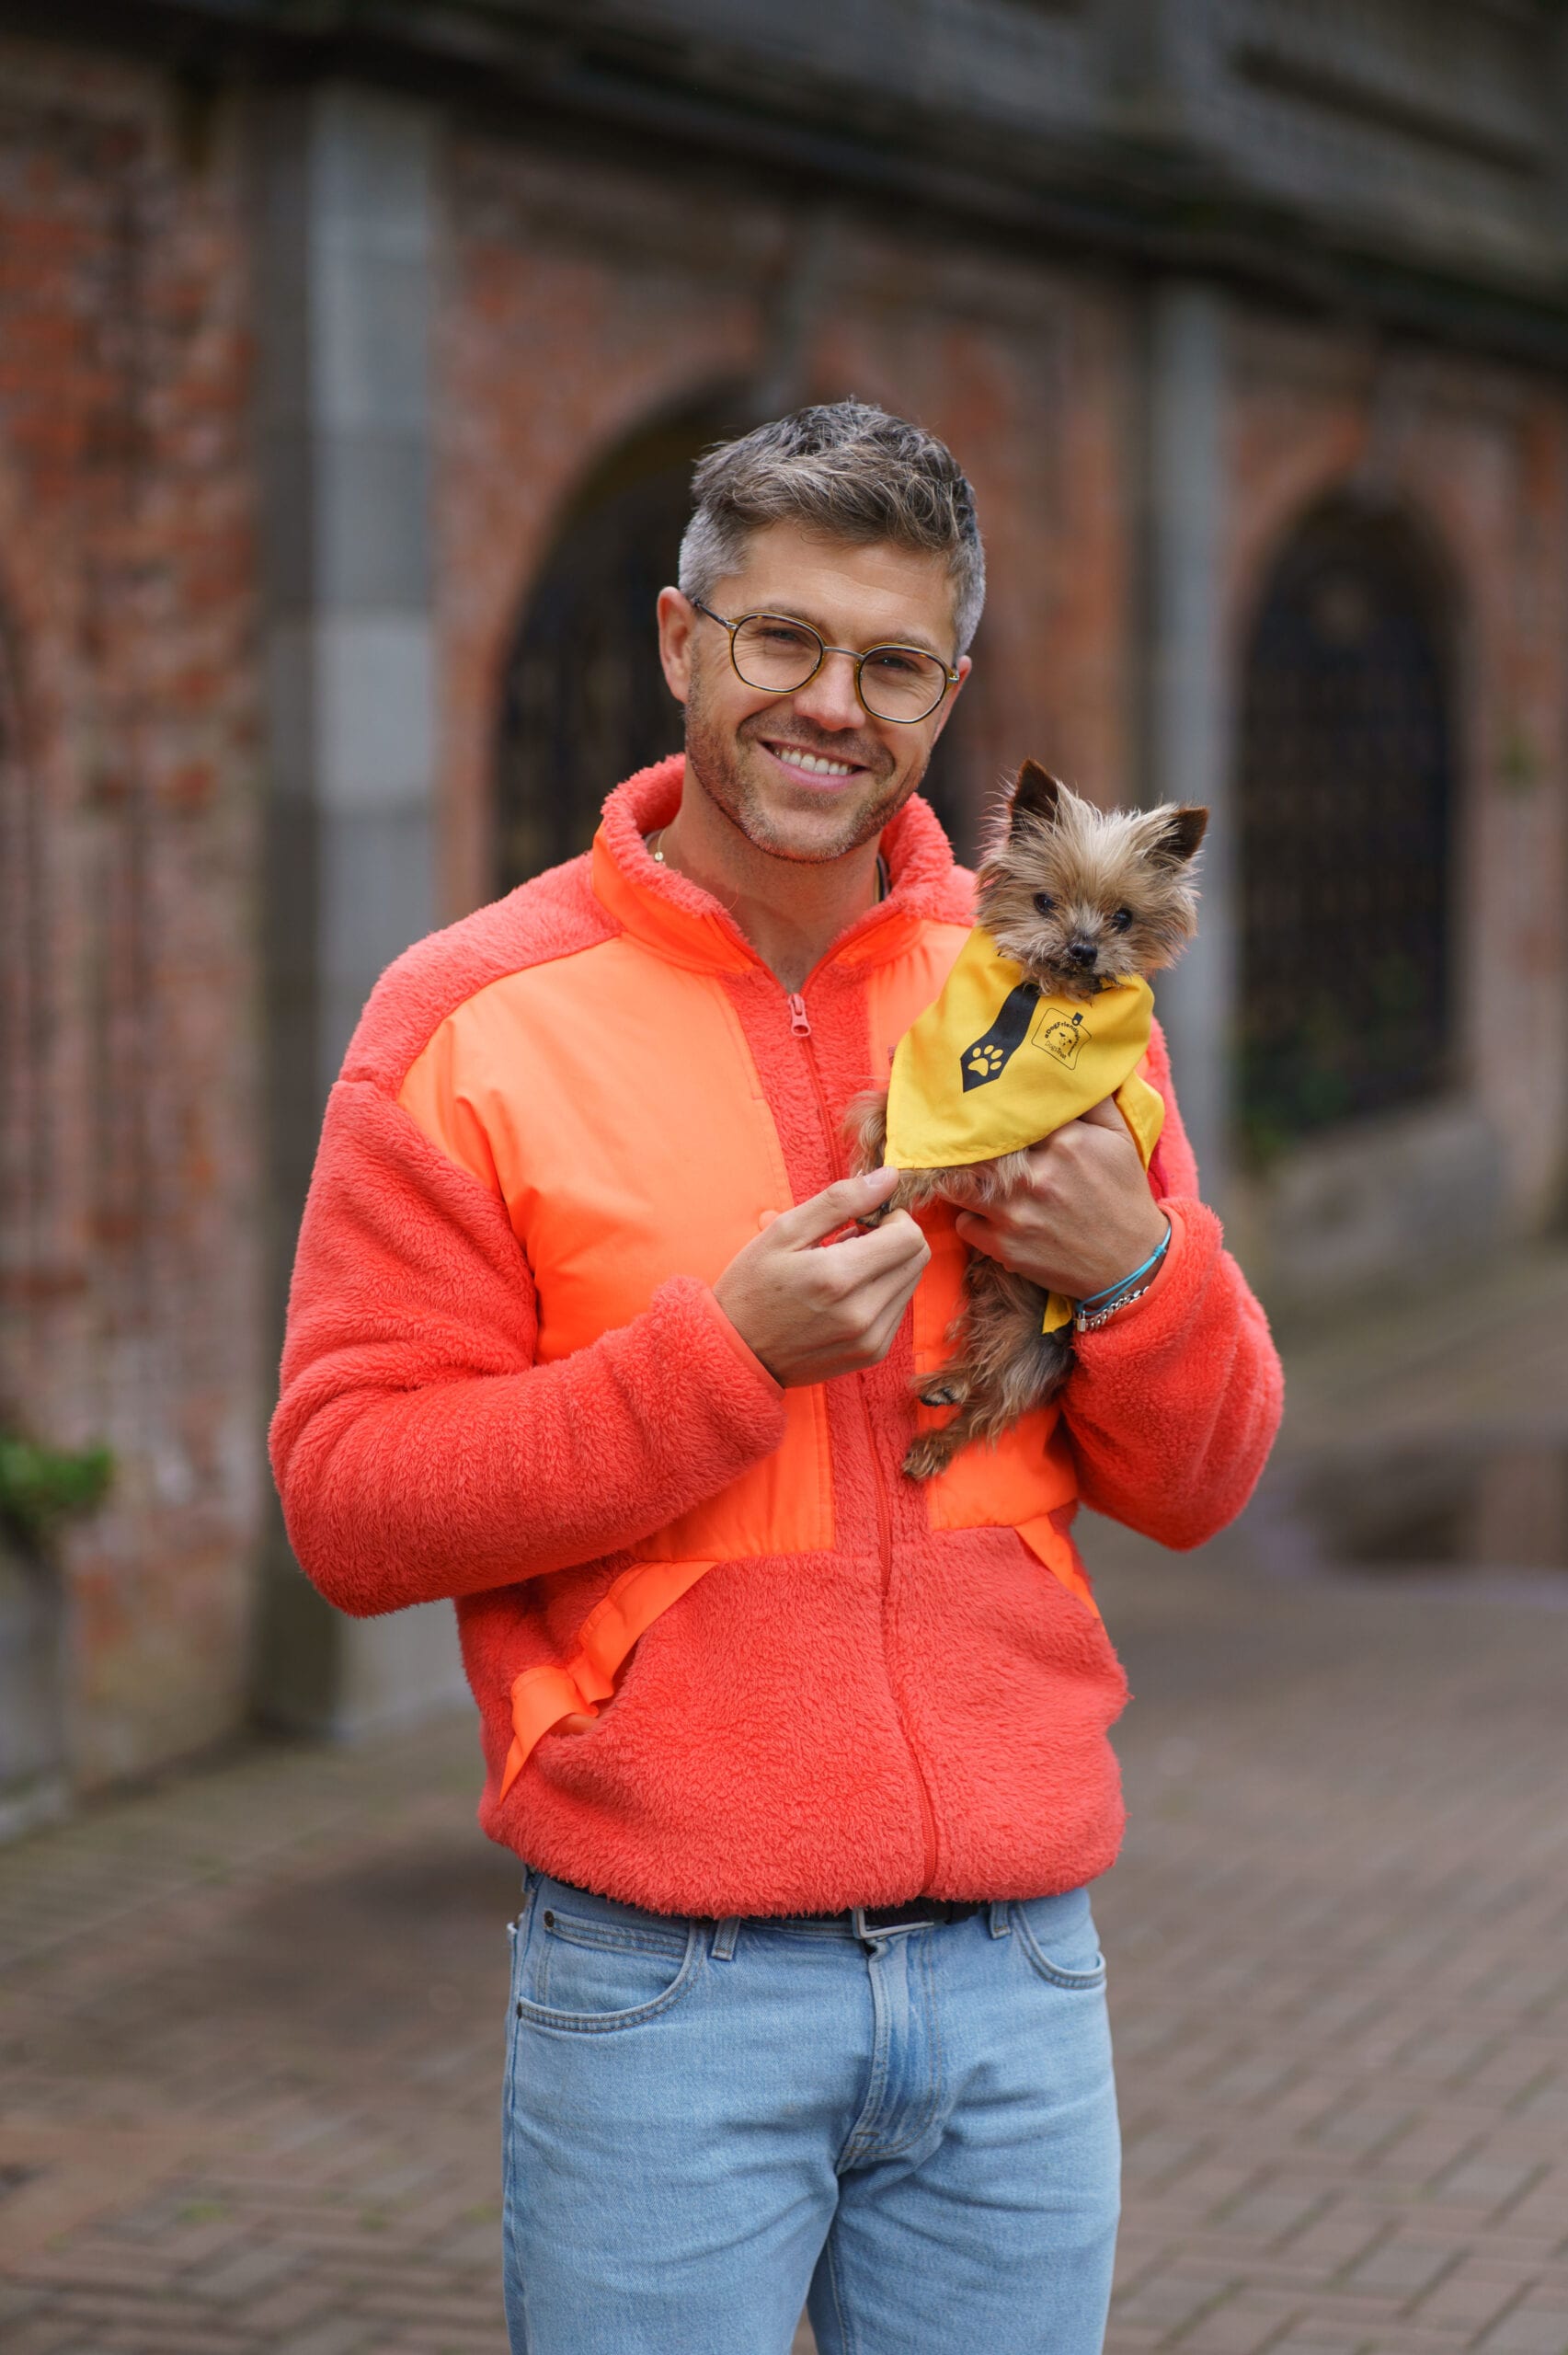 Darren Kennedy launches the fourth national ‘Dog Friendly Ireland Day’ with Dogs Trust